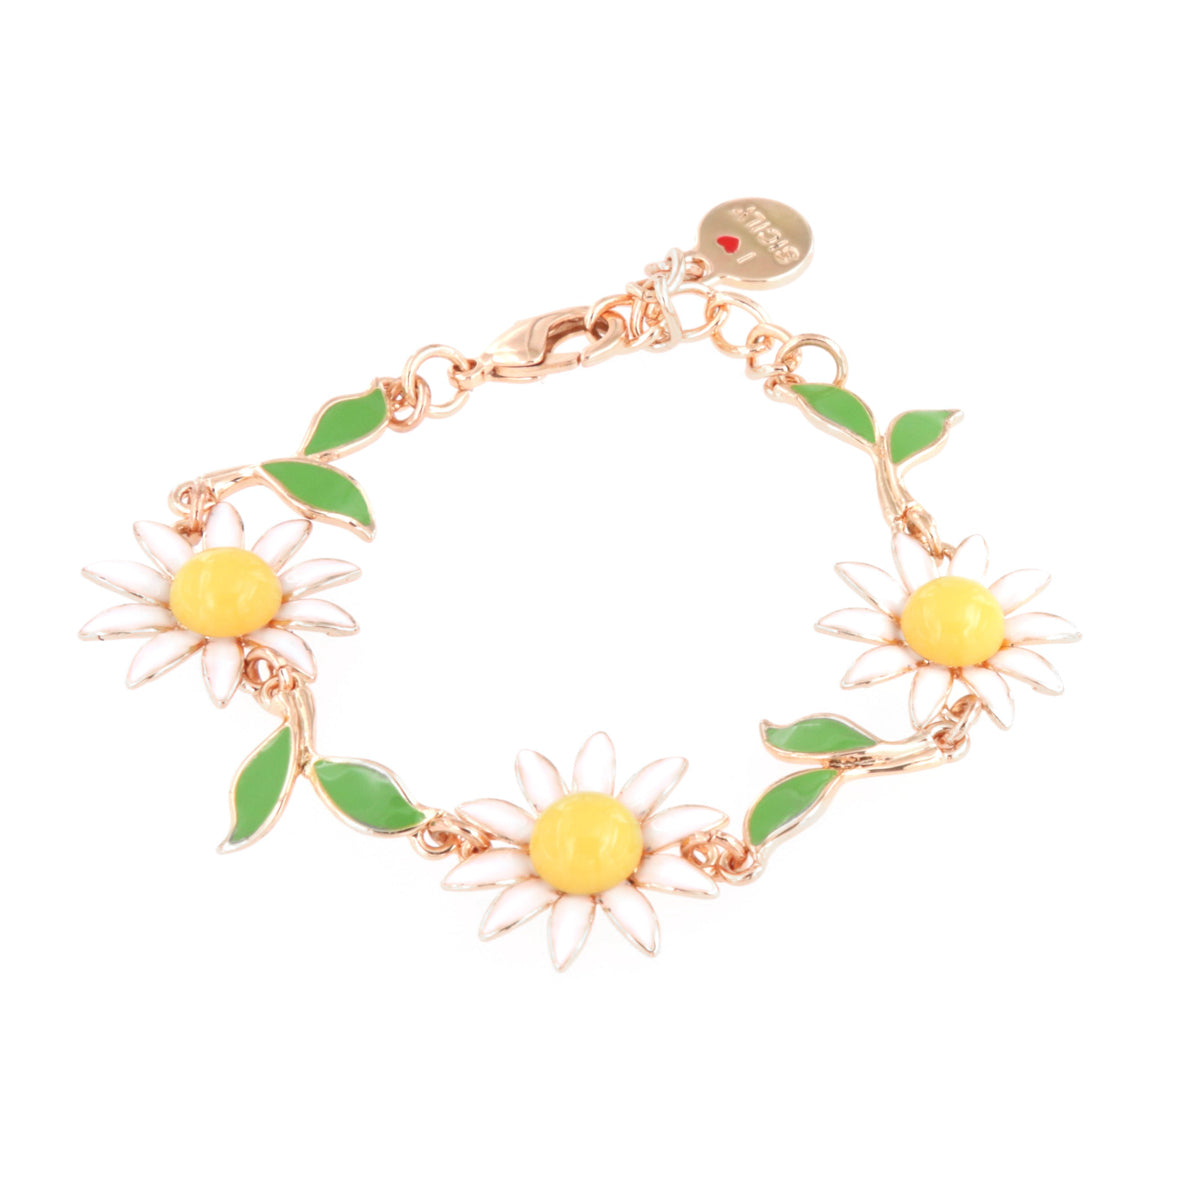 Metal bracelet Rolò jersey with tris of daisies and leaves, embellished with colored glazes